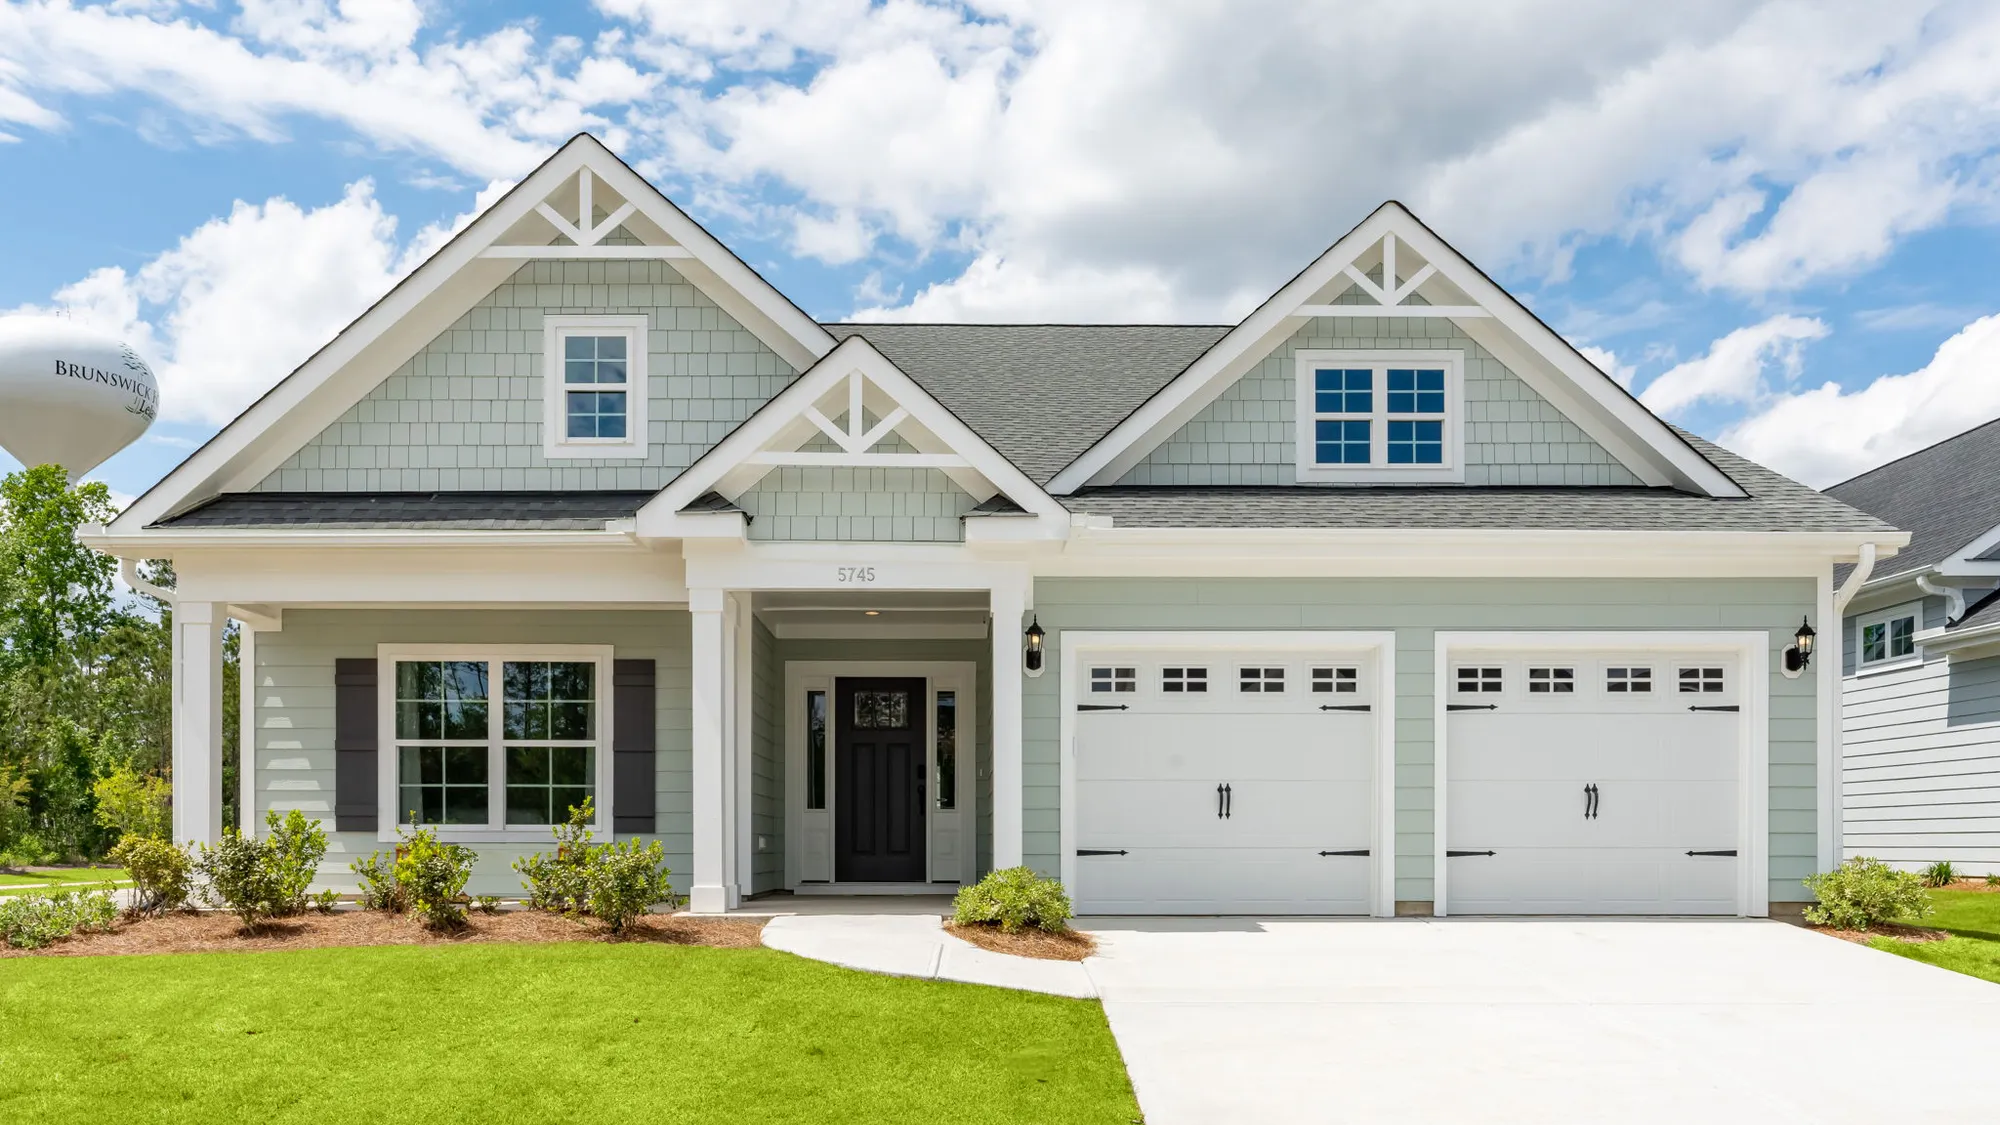 New home for sale in Murrells Inlet SC by Mungo Homes